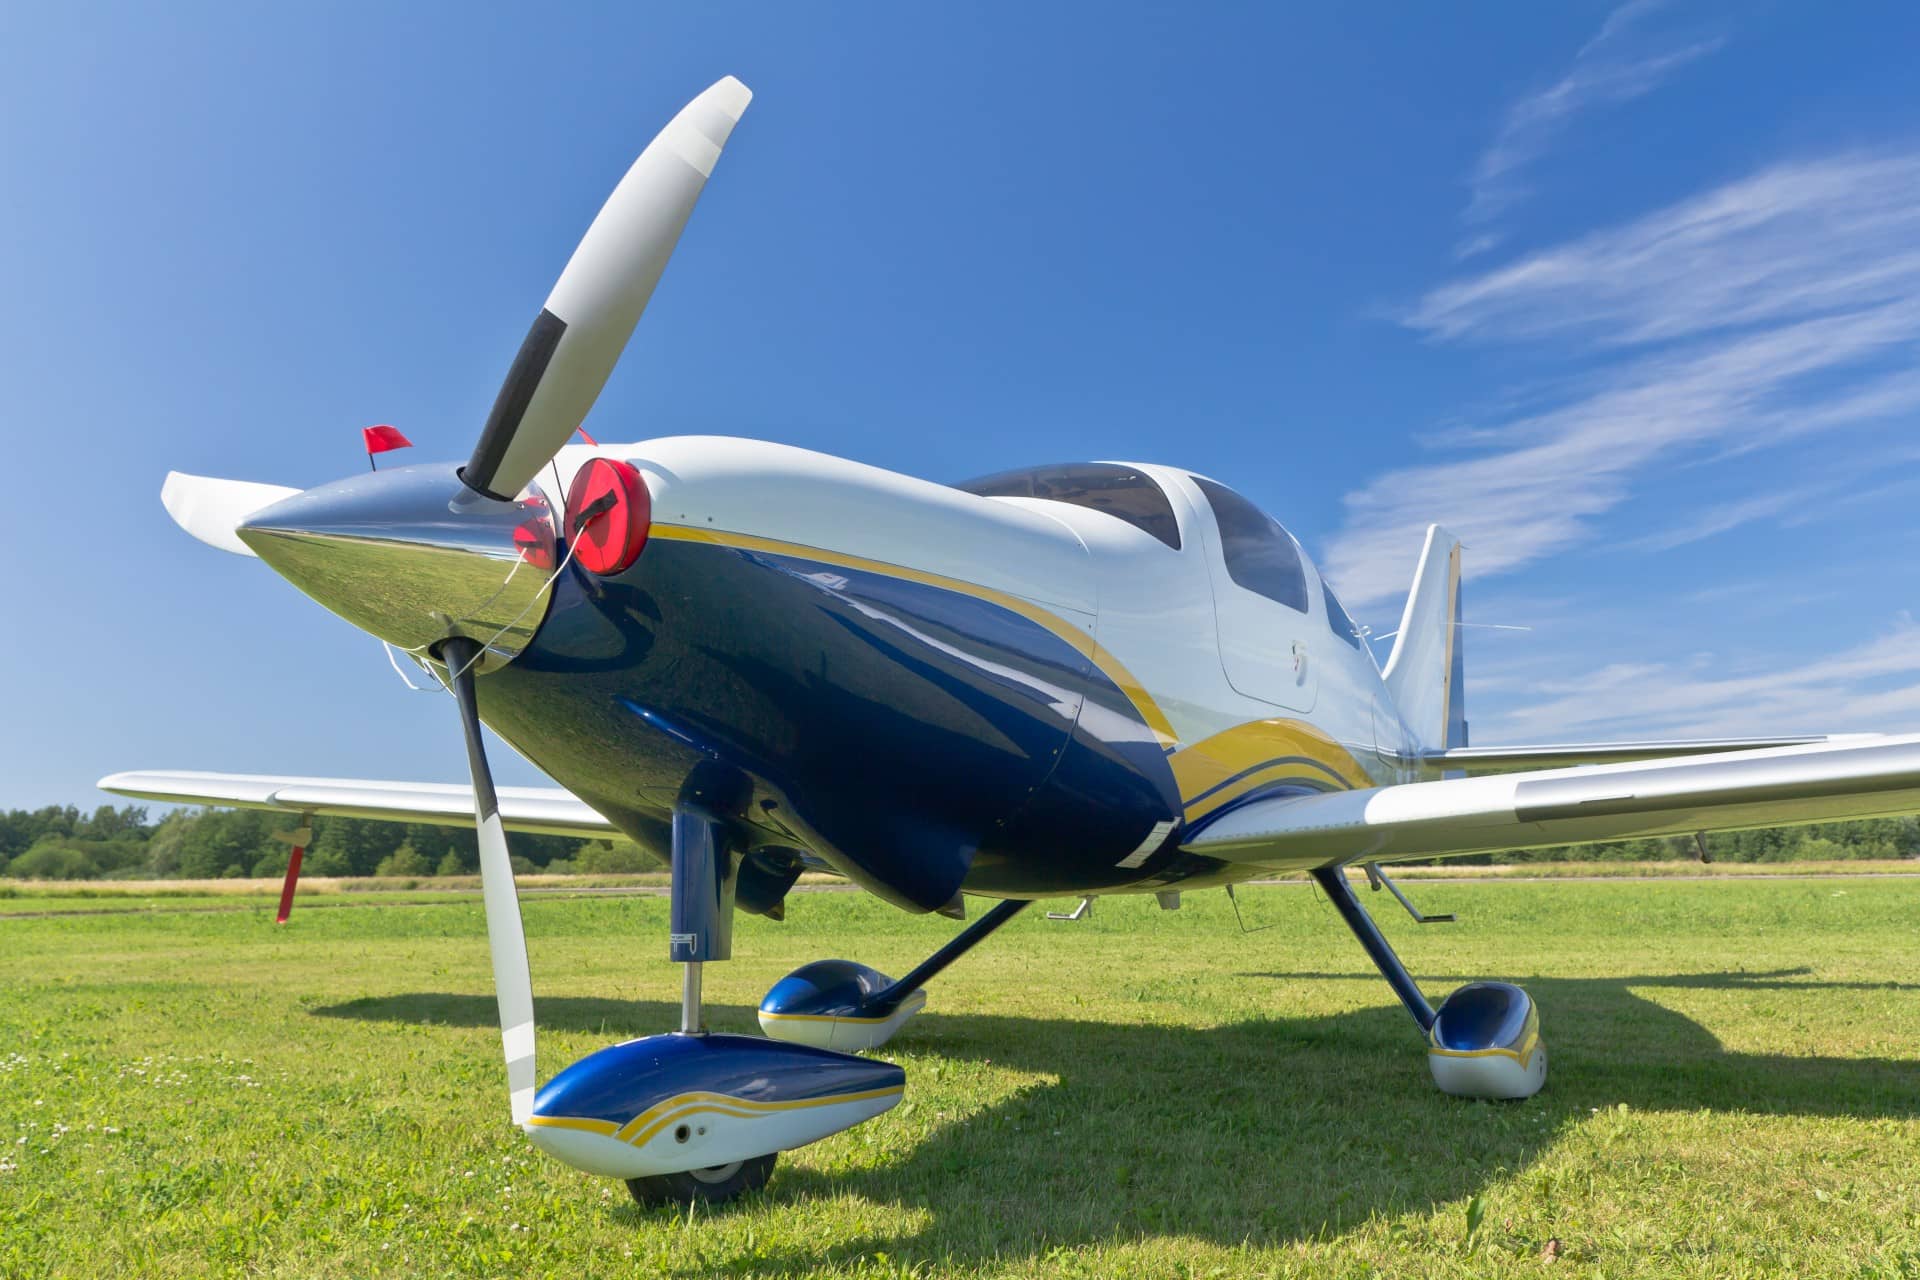 A white and blue plane parked on the grass